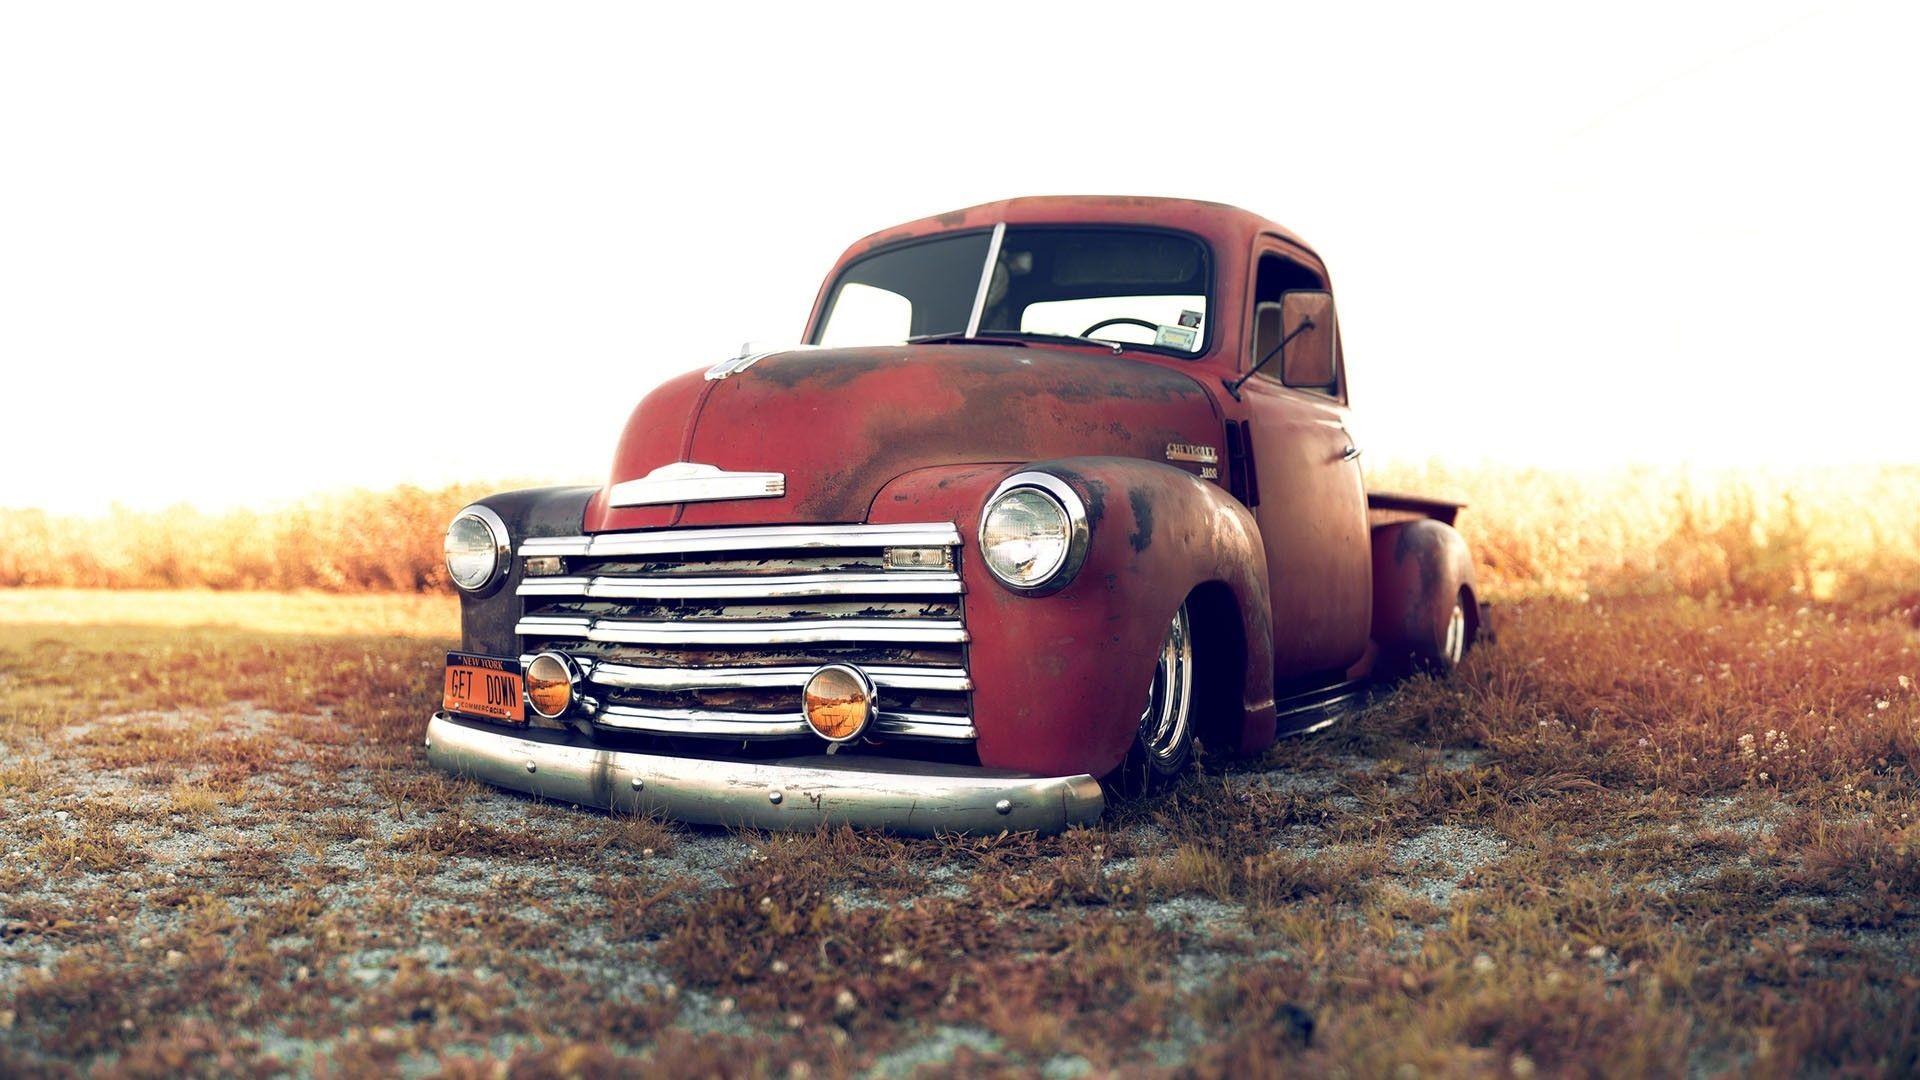 1920x1080 Old Chevy Trucks Wallpaper Images 6 HD Wallpapers | aduphoto.